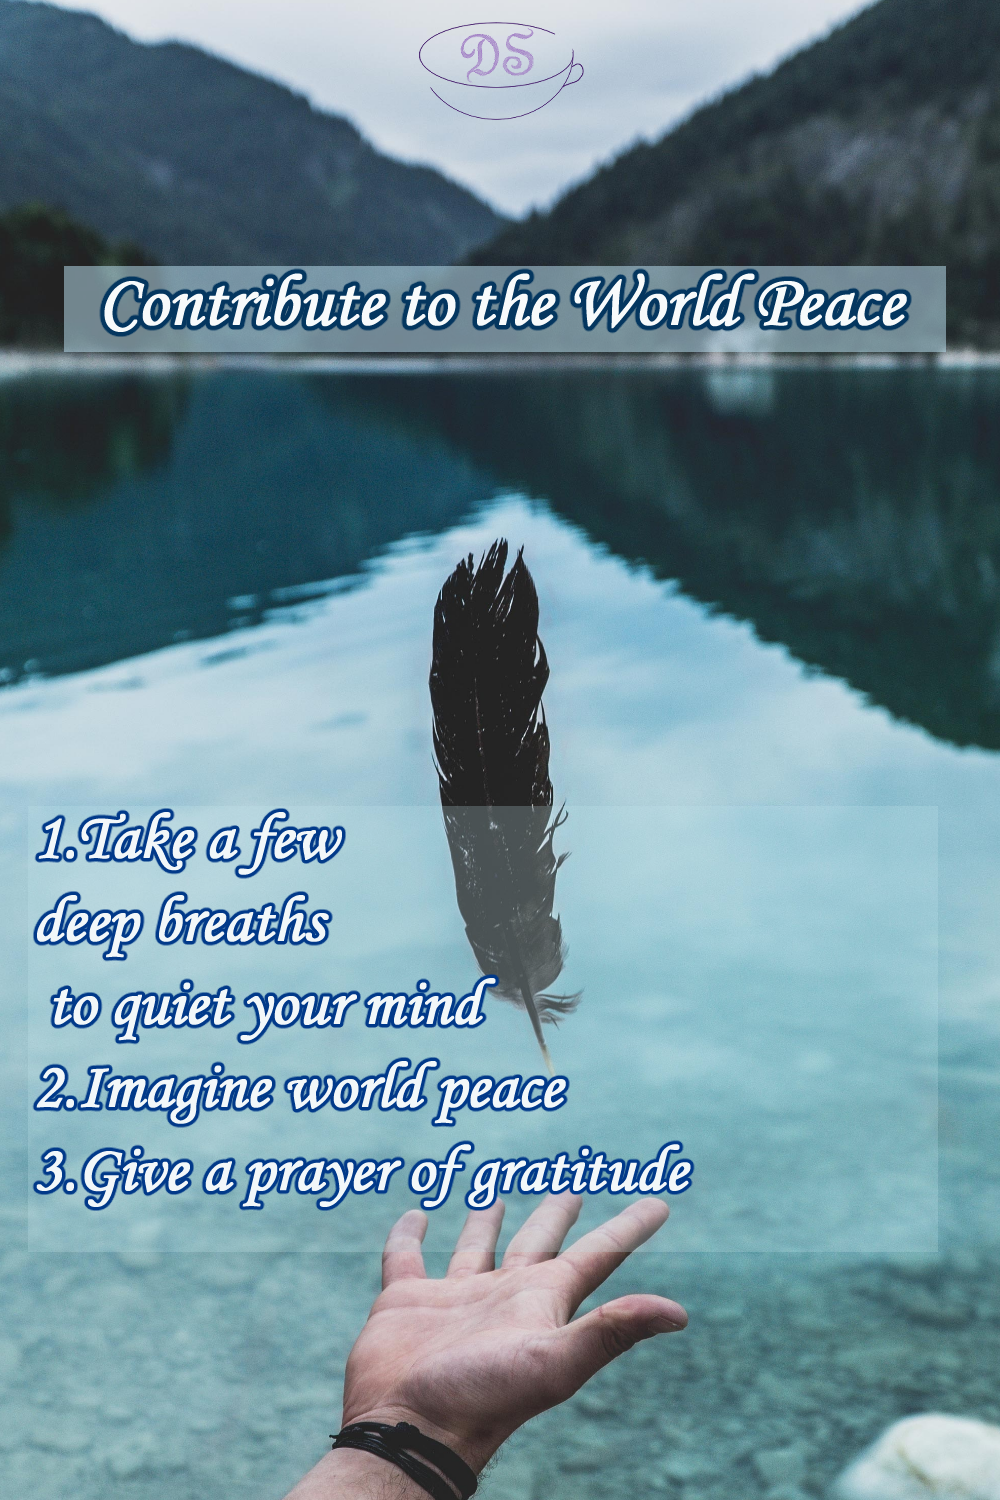 How to Contribute to the World Peace